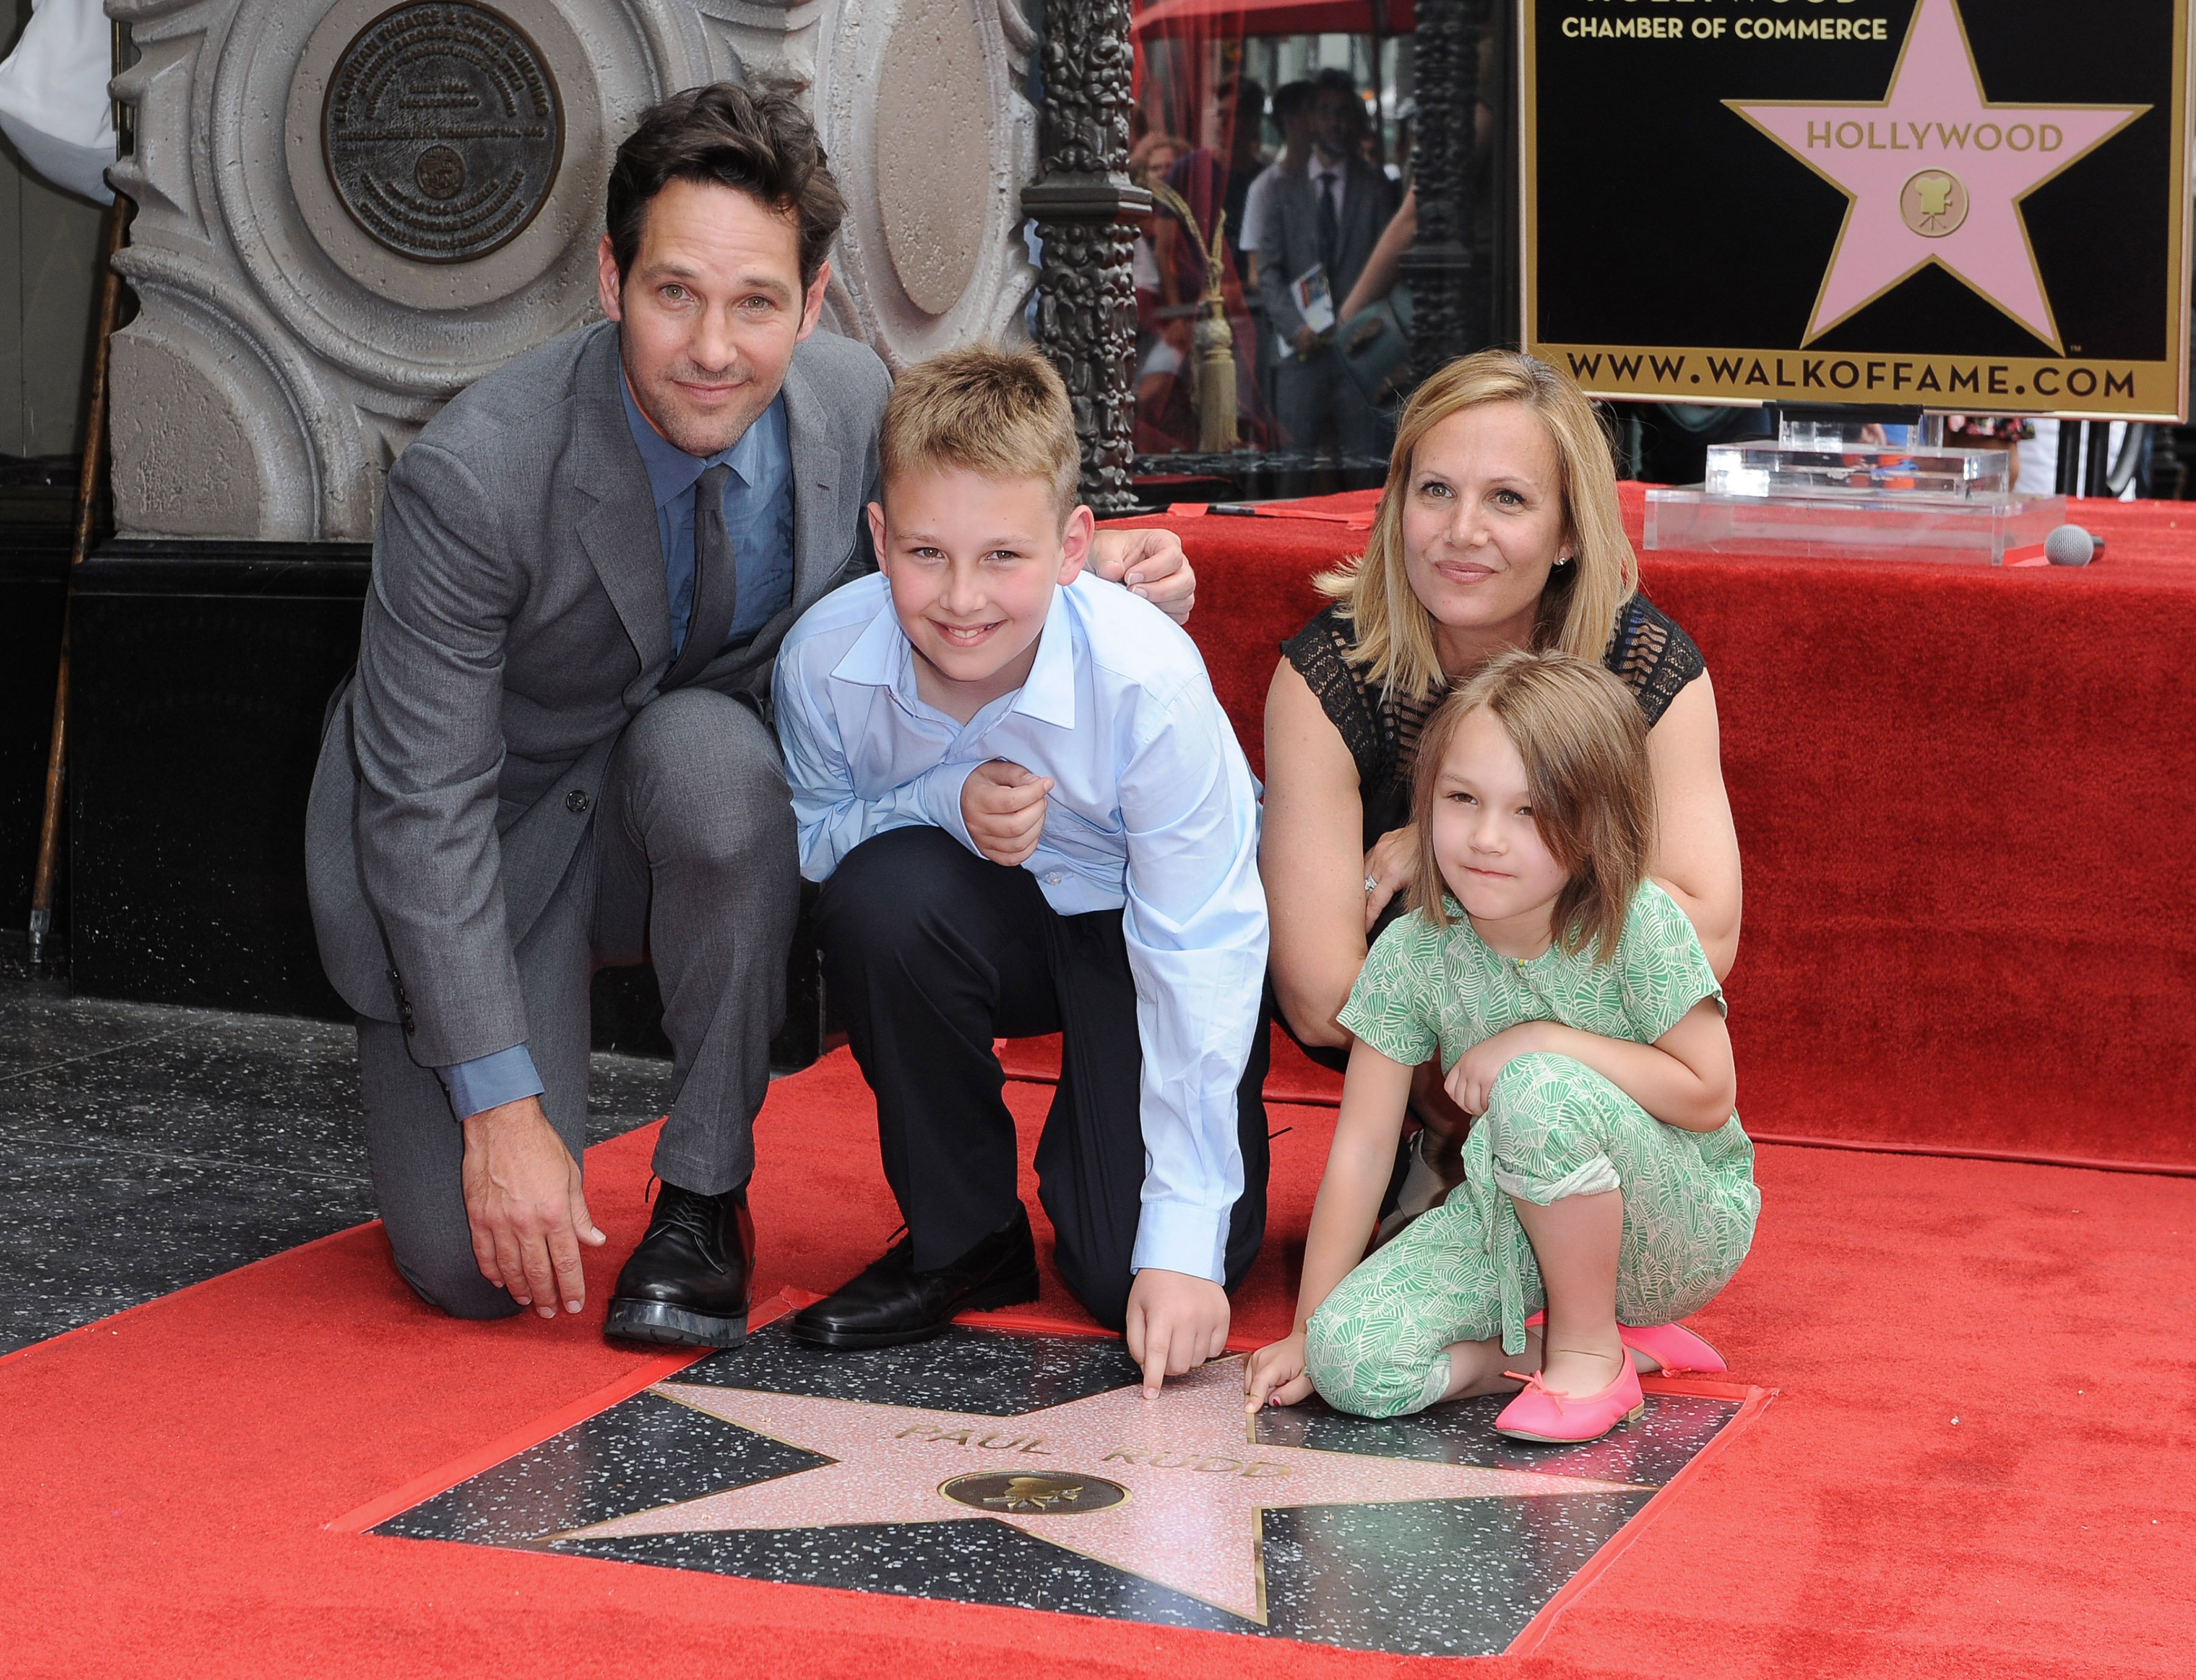 Paul Rudd and his family attend ceremony honoring the actor with a Star on the Hollywood Walk of Fame on July 1, 2015, in Hollywood, California. | Source: Getty Images